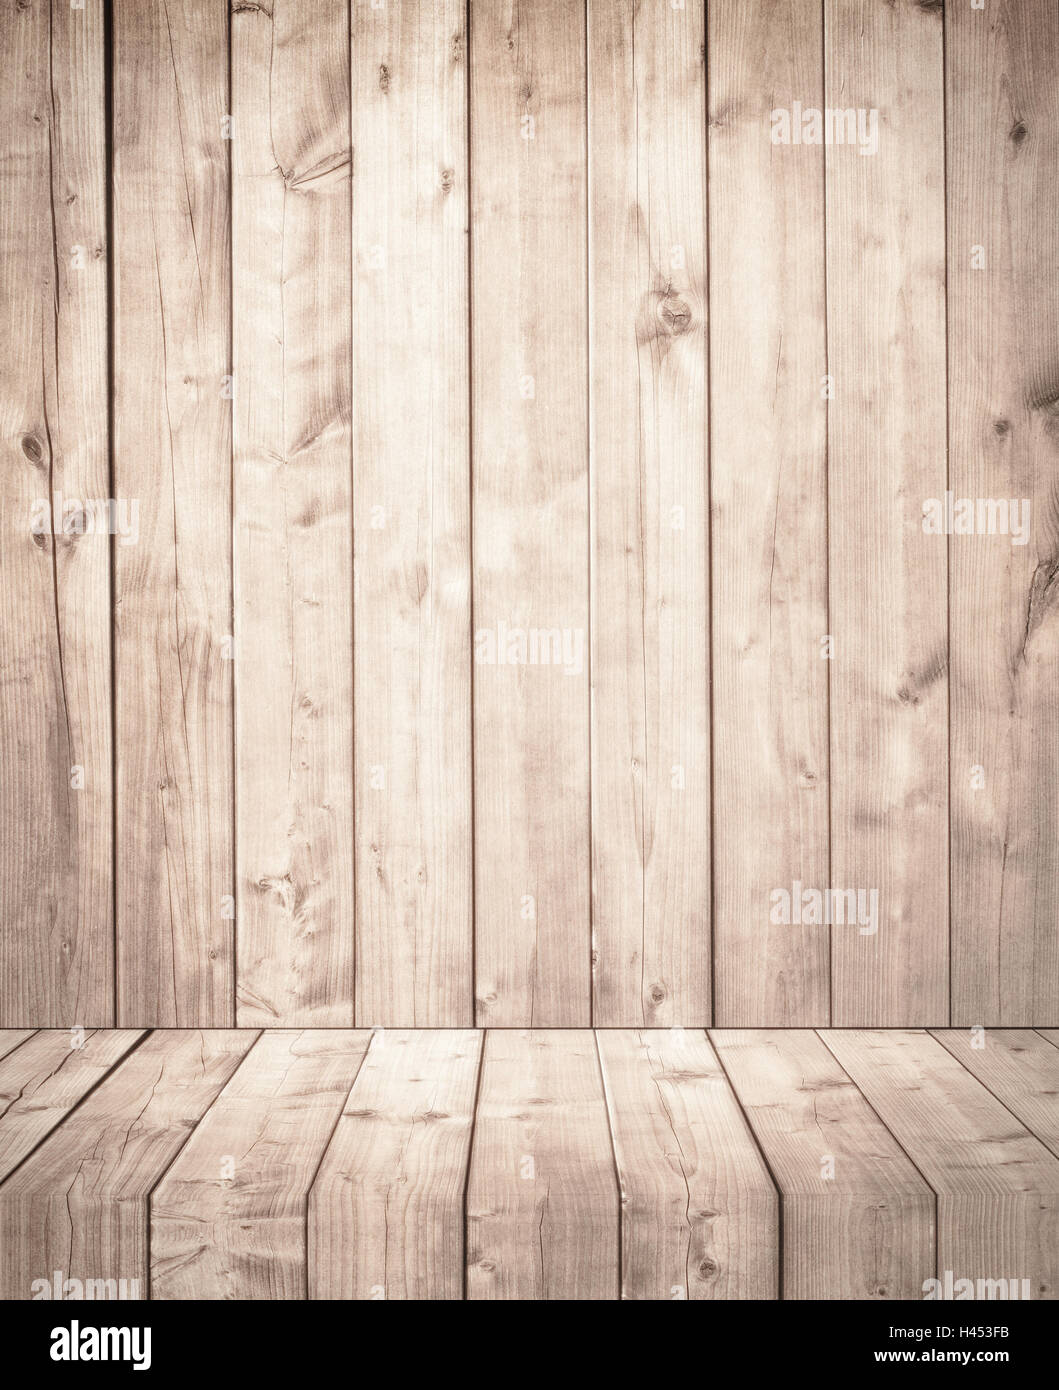 Brown dark grunge wooden wall with shelves Stock Photo